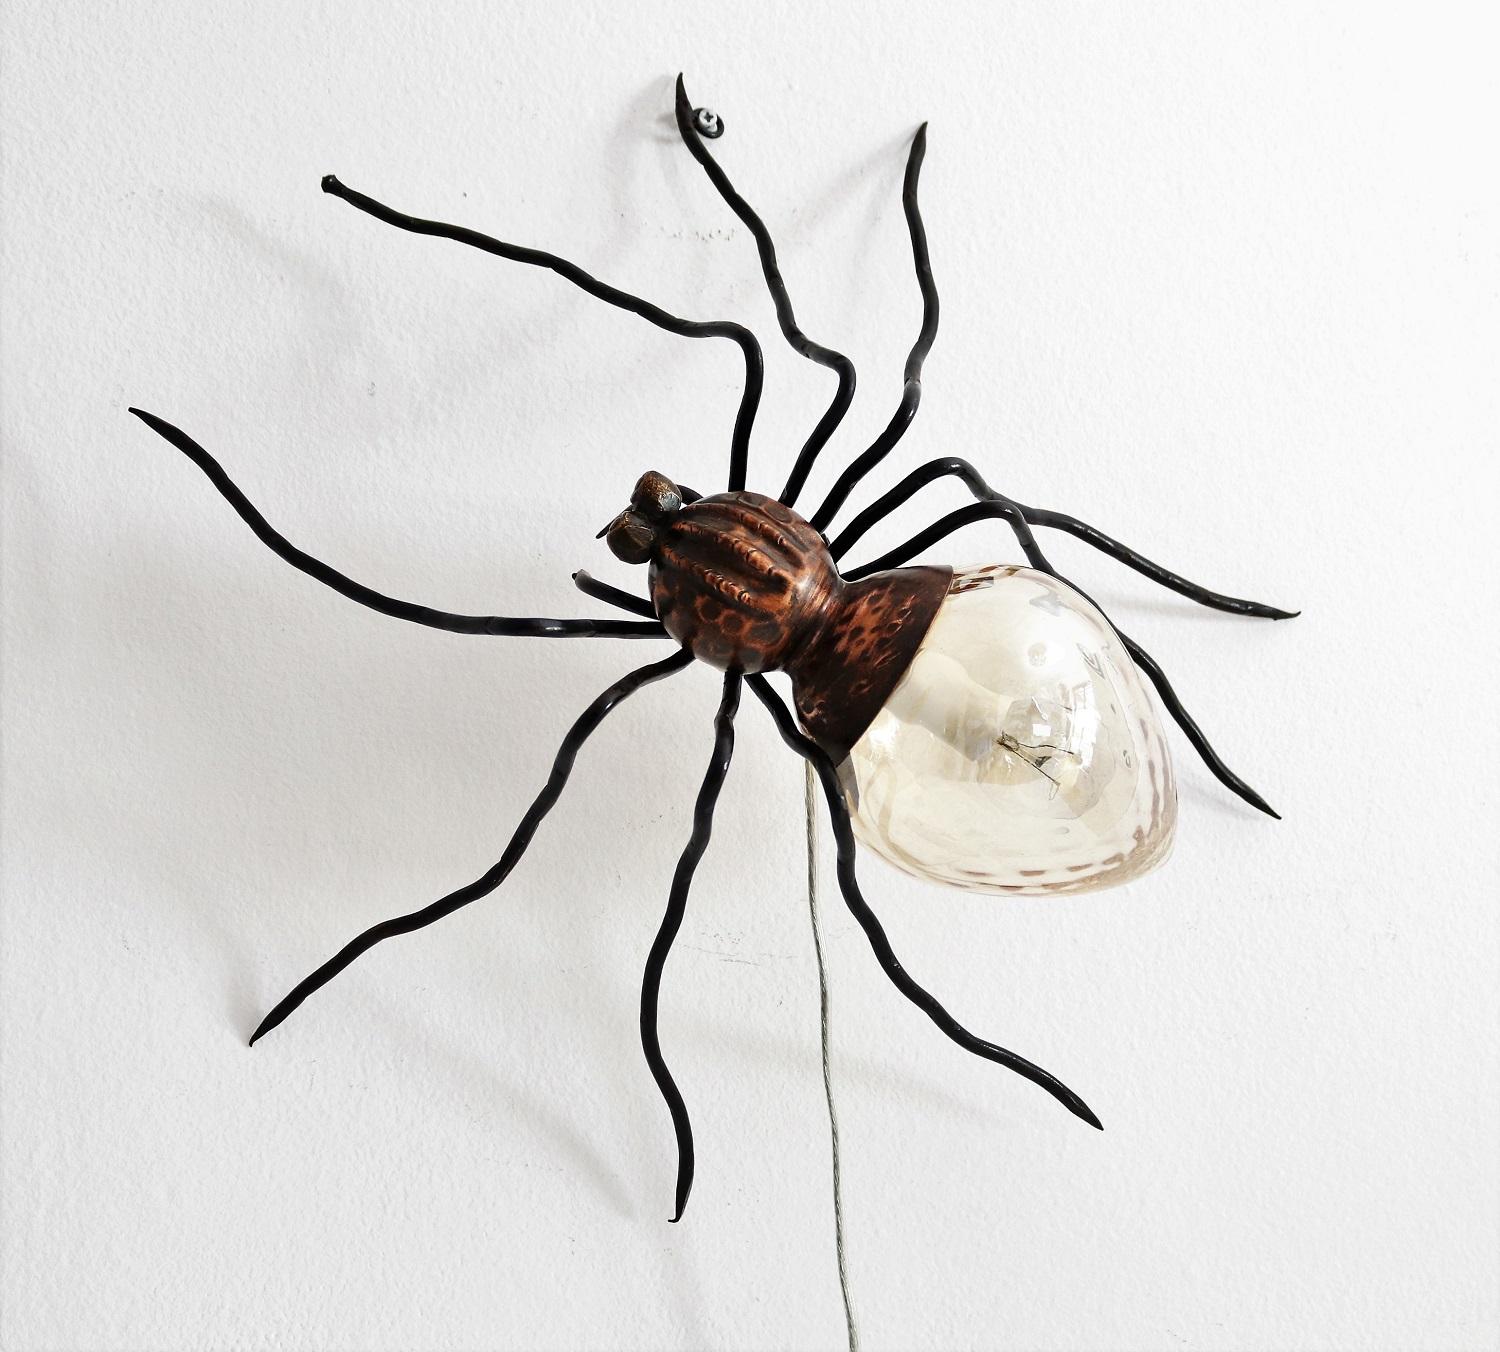 Gorgeous spider lamp with nine legs, made in Italy, circa 1960s.
This lamp is a typical outdoor lamp mounted over the entrance door of Italian houses of the 1960s. Nowadays they are requested design objects to be used also indoor.
Made of solid